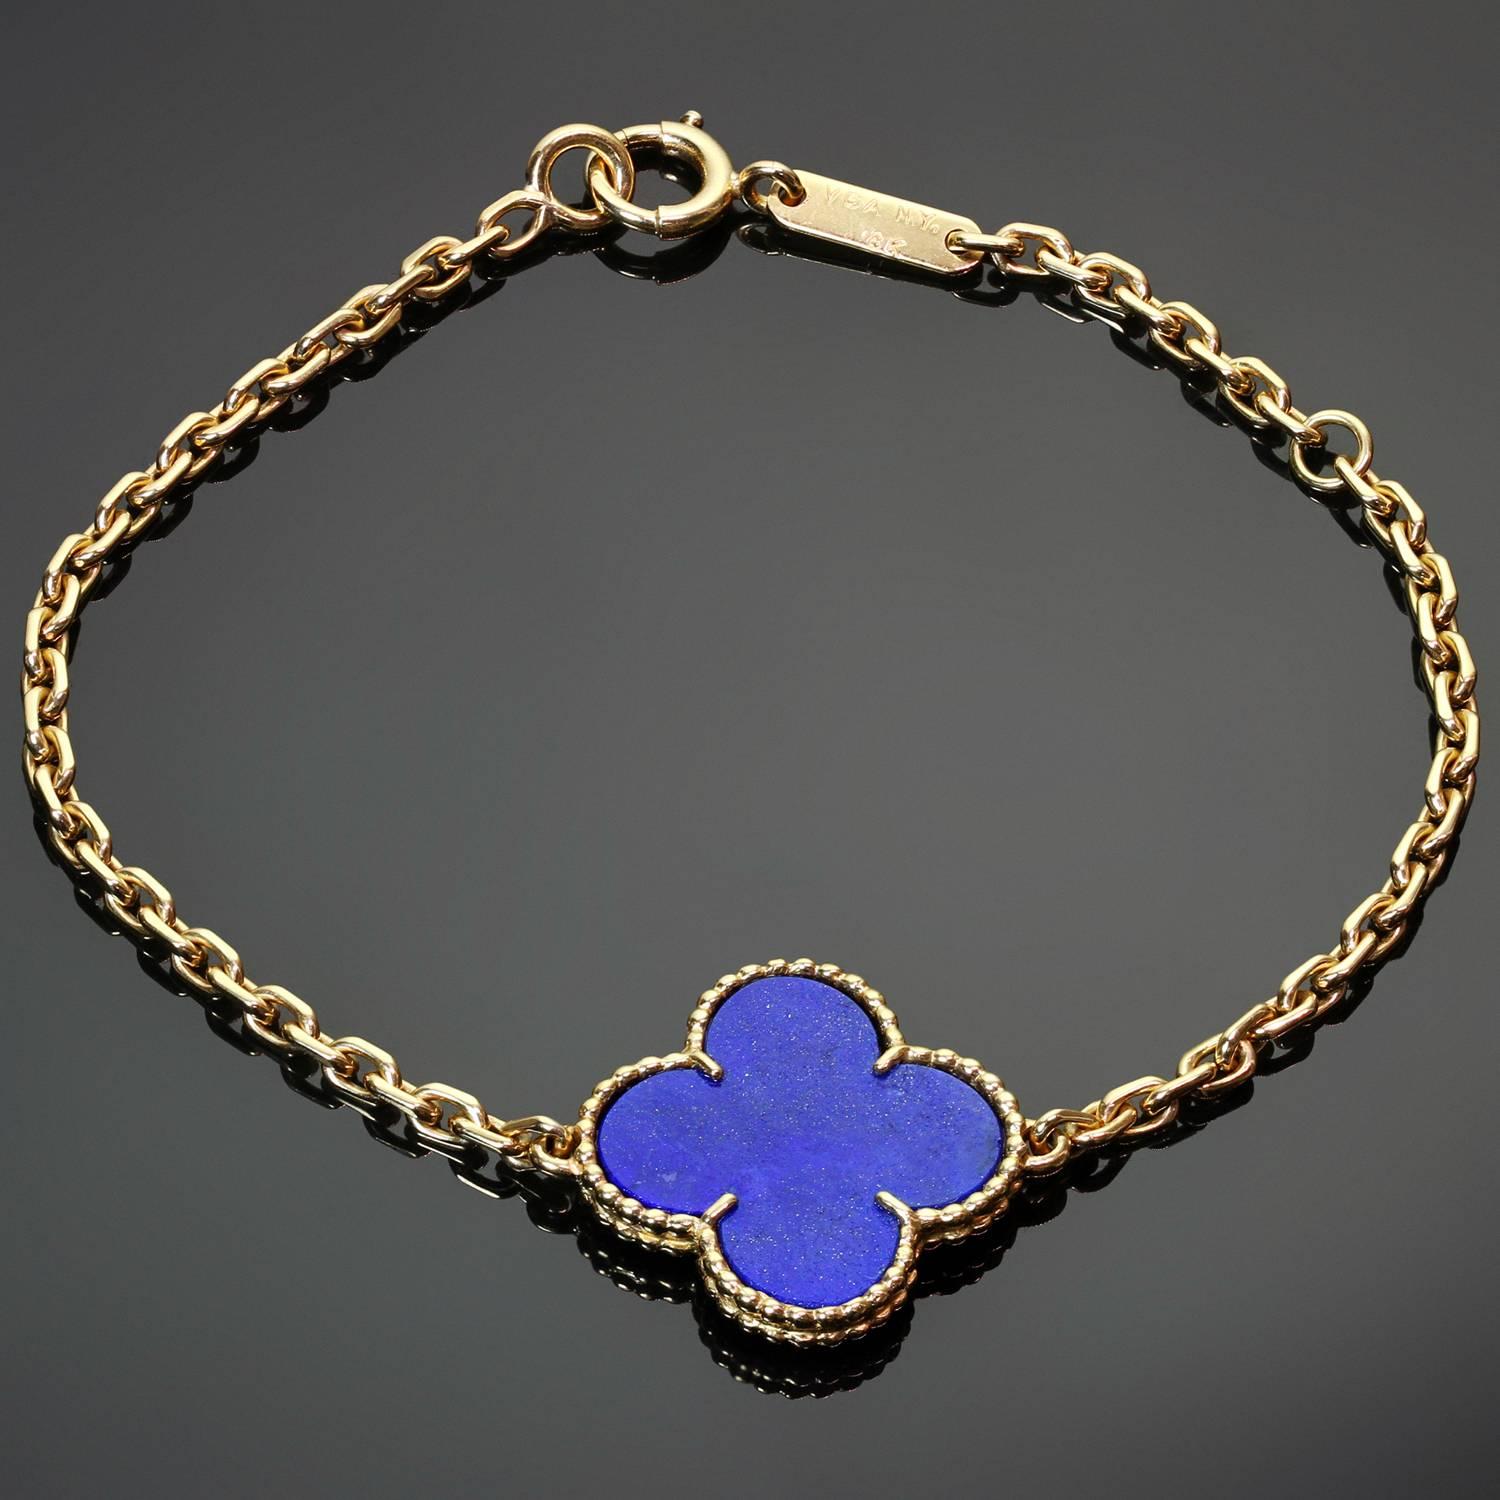 This rare Van Cleef & Arpels bracelet from the Magic Alhambra collection is crafted in 18k yellow gold and features a lucky clover charm beautifully inlaid with blue lapis lazuli. Made in France circa 1970s. Pre-owned. Shows some normal signs of